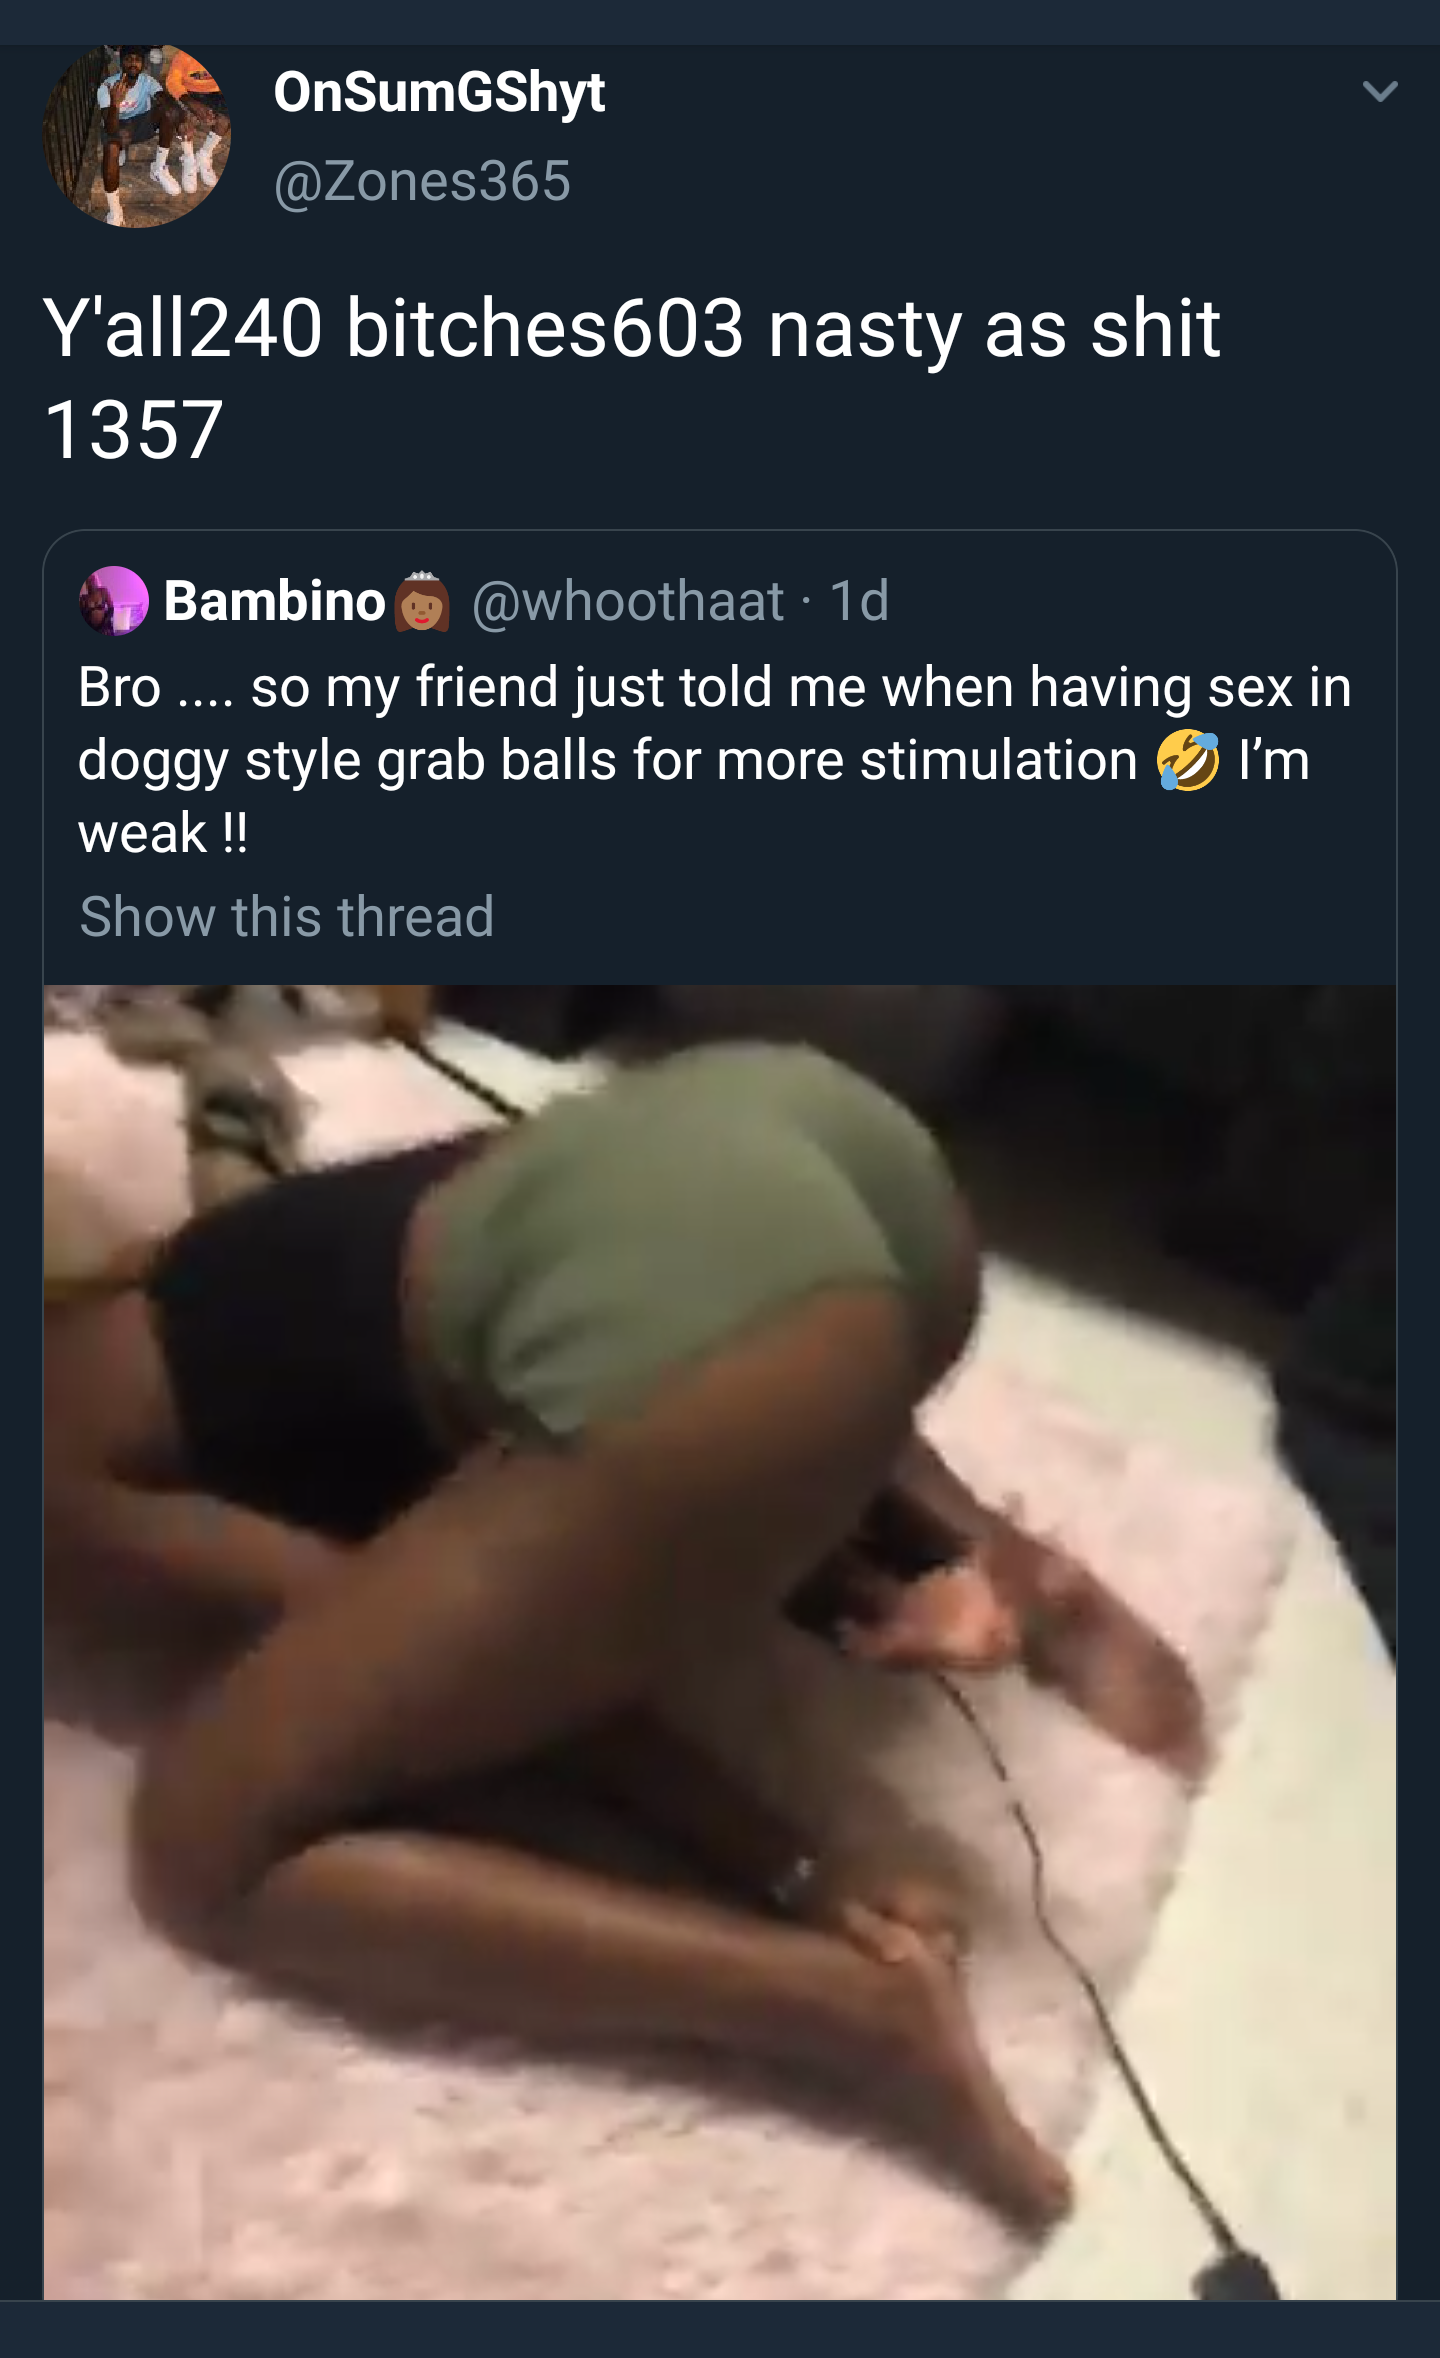 OnSumGShyt Y'all240 bitches603 nasty as shit 1357 Bambino 1d Bro.... so my friend just told me when having sex in doggy style grab balls for more stimulation I'm weak !! Show this thread